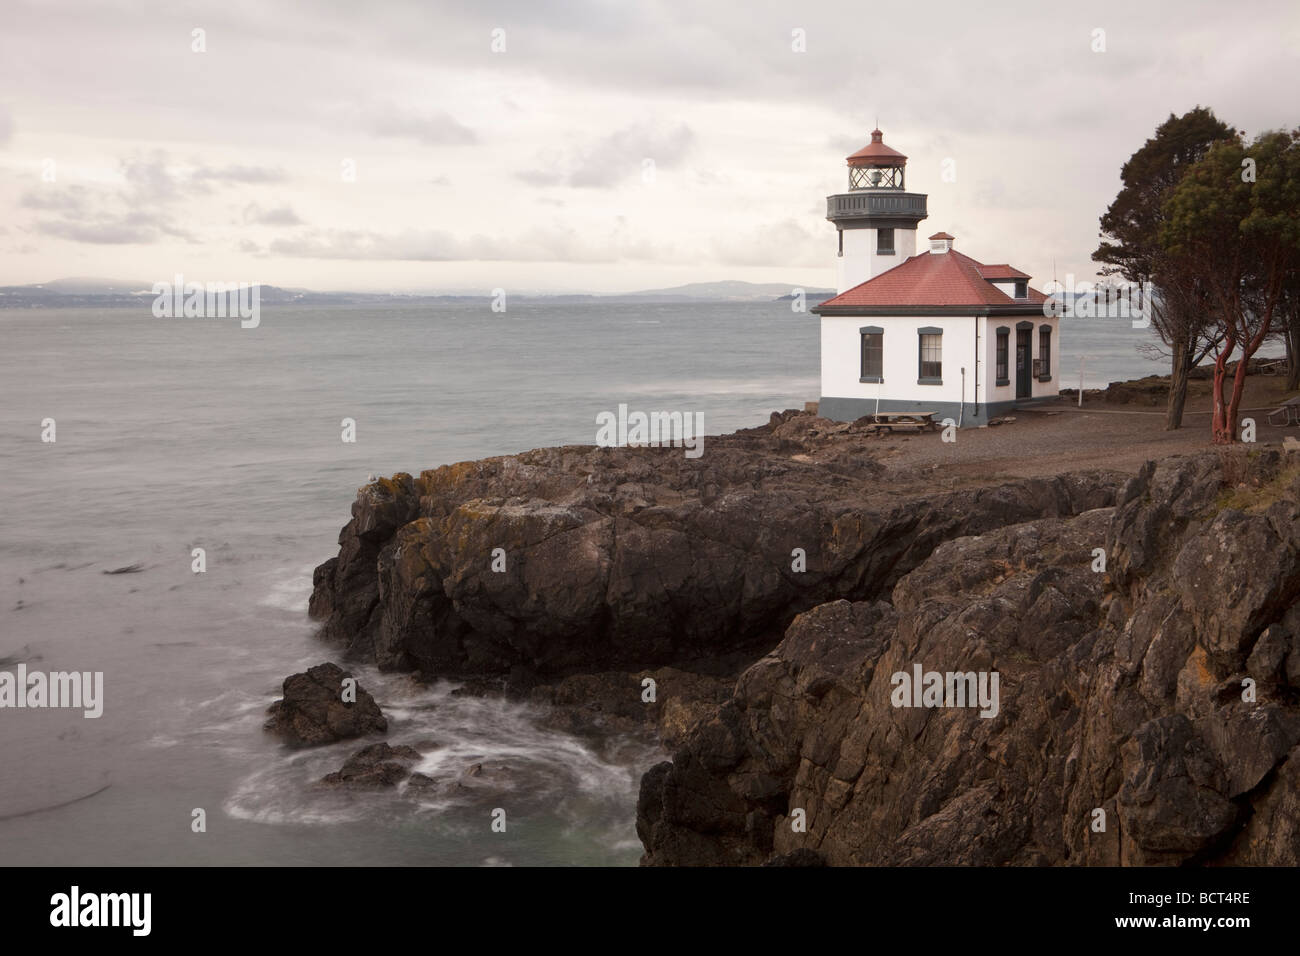 The lighthouse at Lime Kiln Point State Park on San Juan Island The building looks out over the waters of Puget Sound Stock Photo